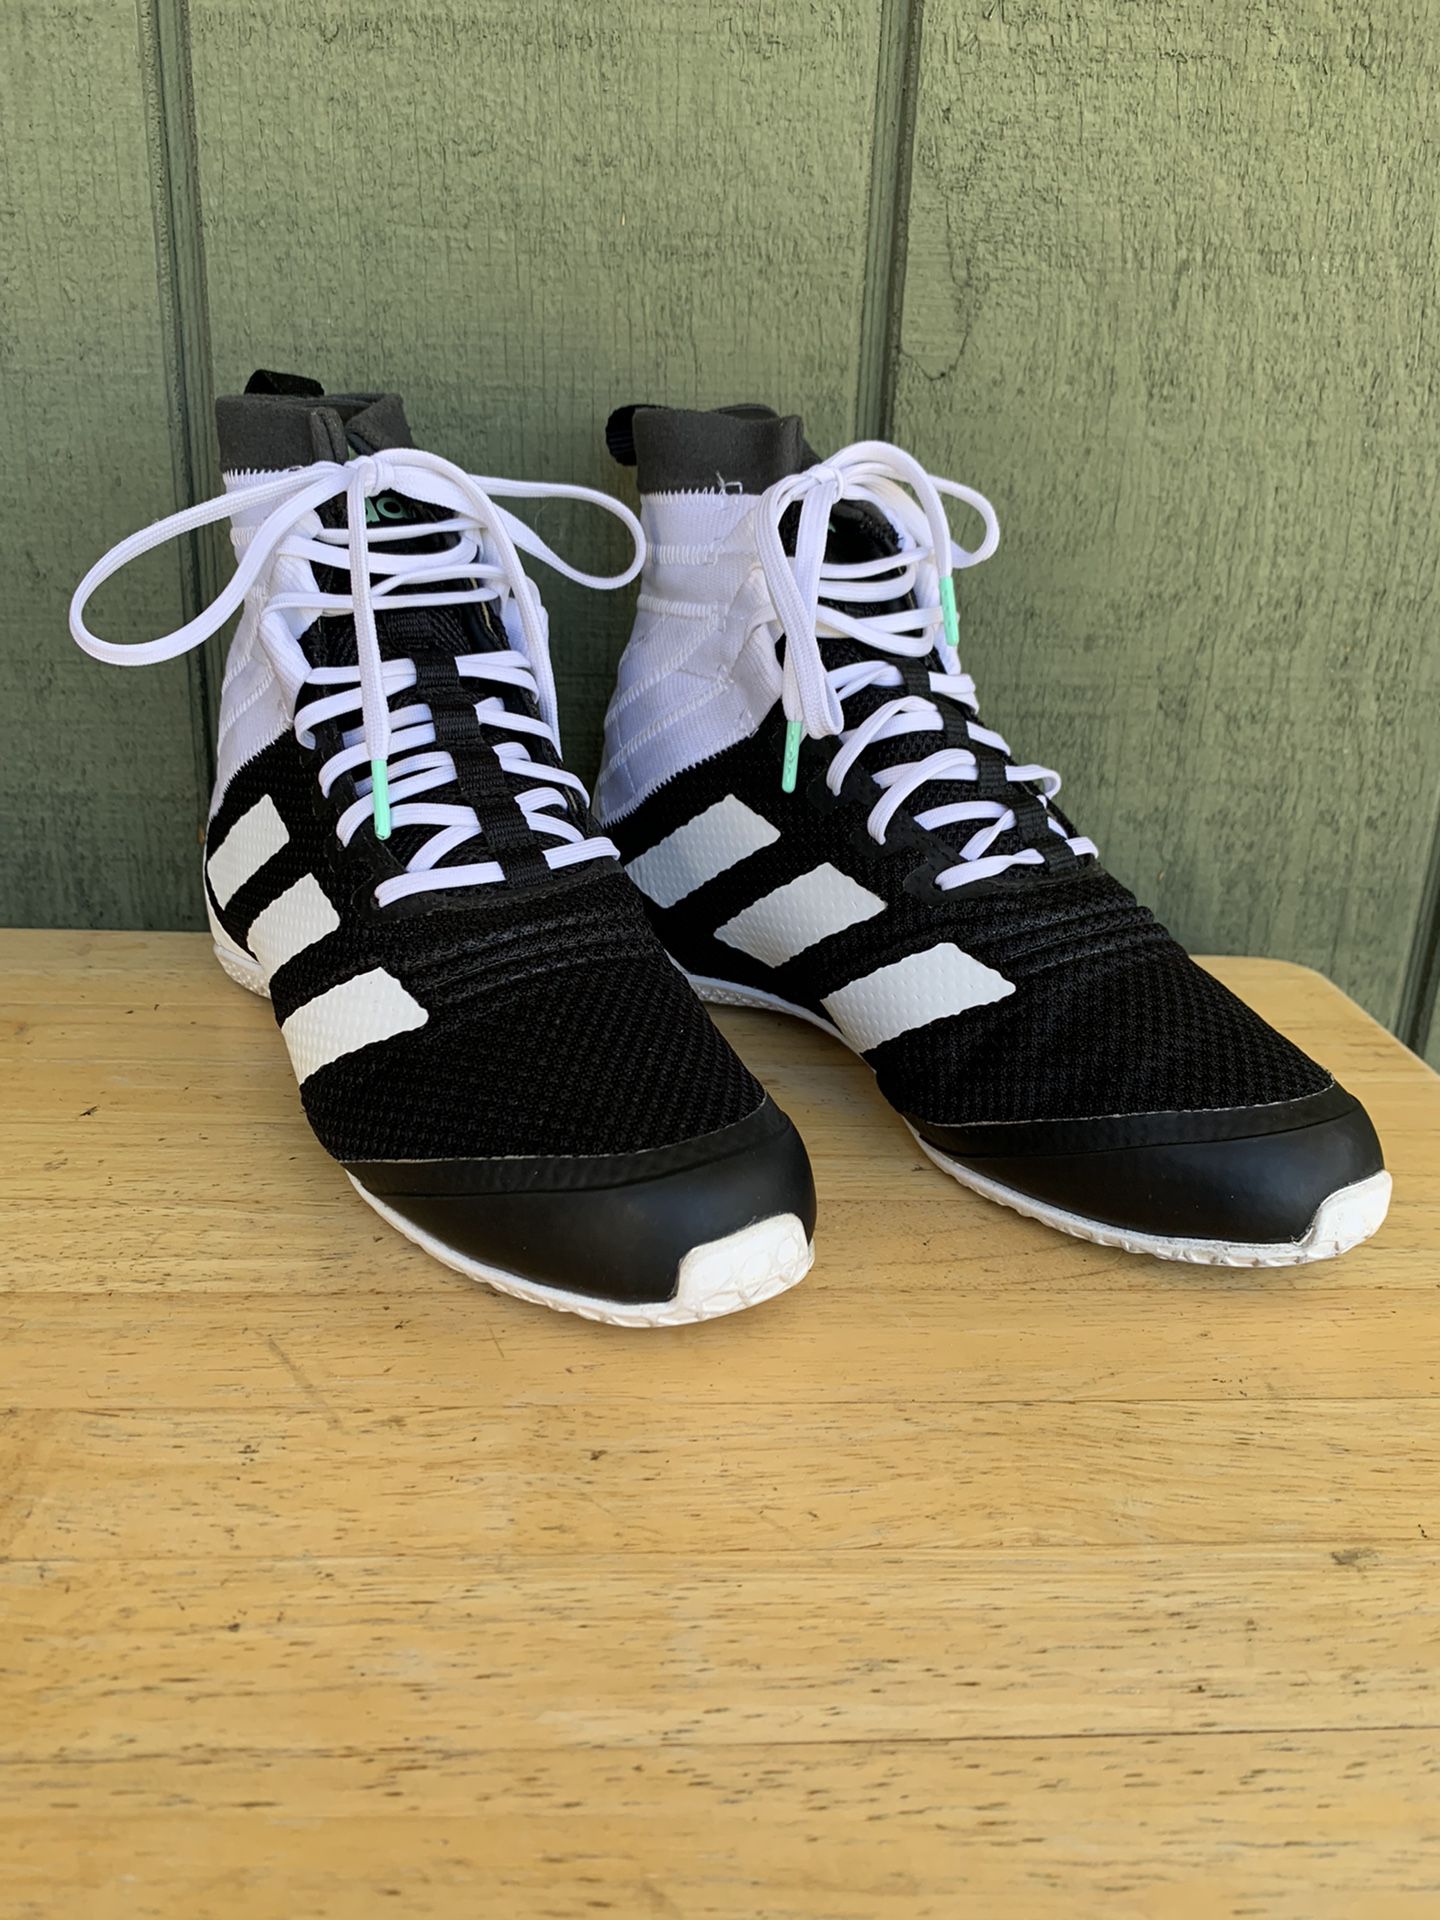 adidas Speedex 18 Black White Shoes MENS SIZE 4.5 WOMENS 5.5 for Sale in West Covina, CA - OfferUp